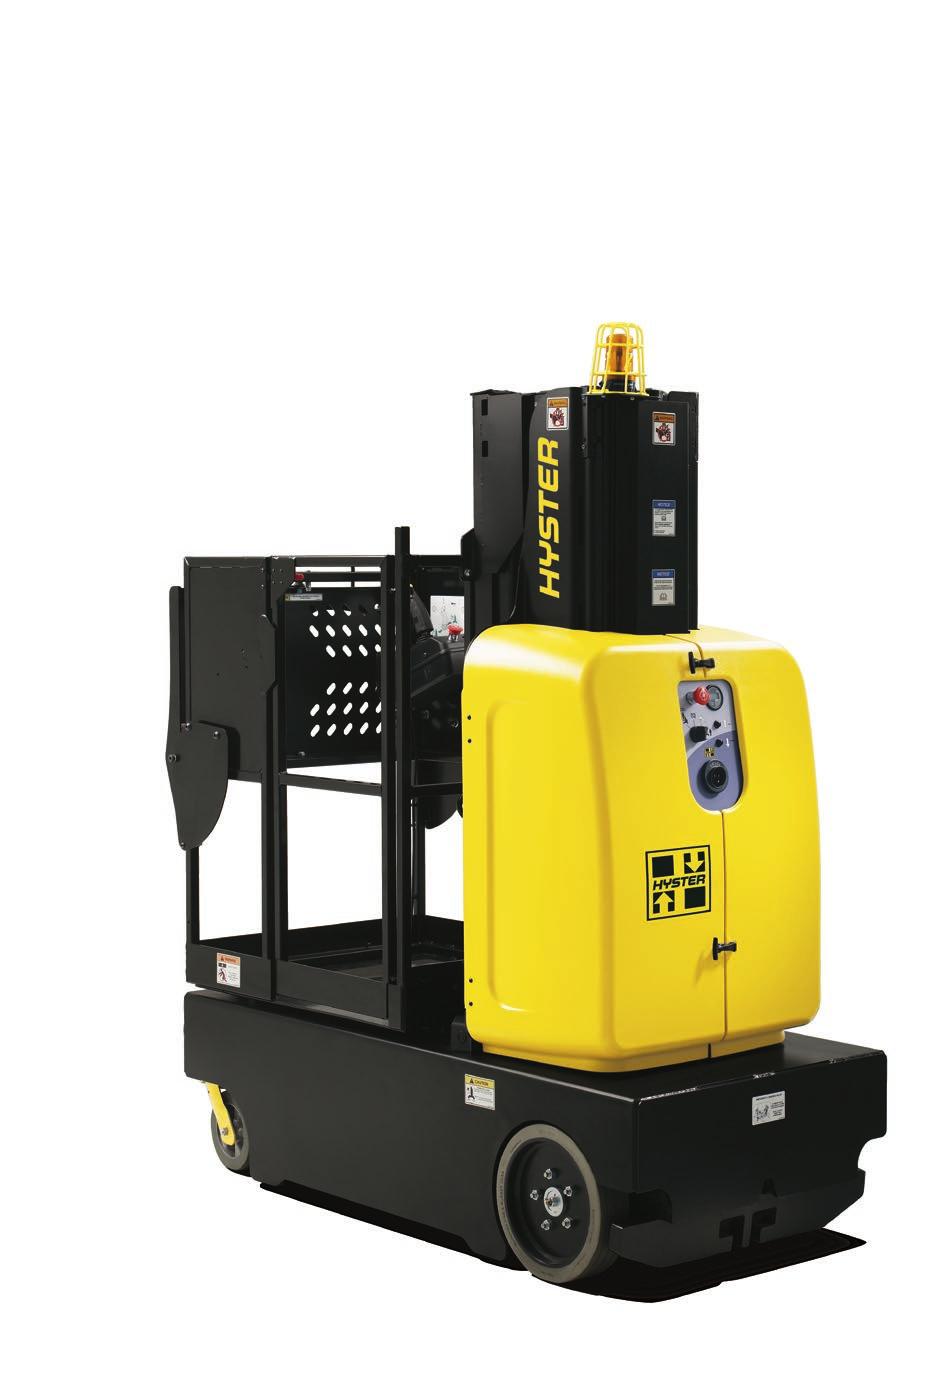 AP20Z SERIES HYSTER ASCENDER AERIAL WORK PLATFORM From ladders to movable staircases, the task of getting workers up and down just got easier.